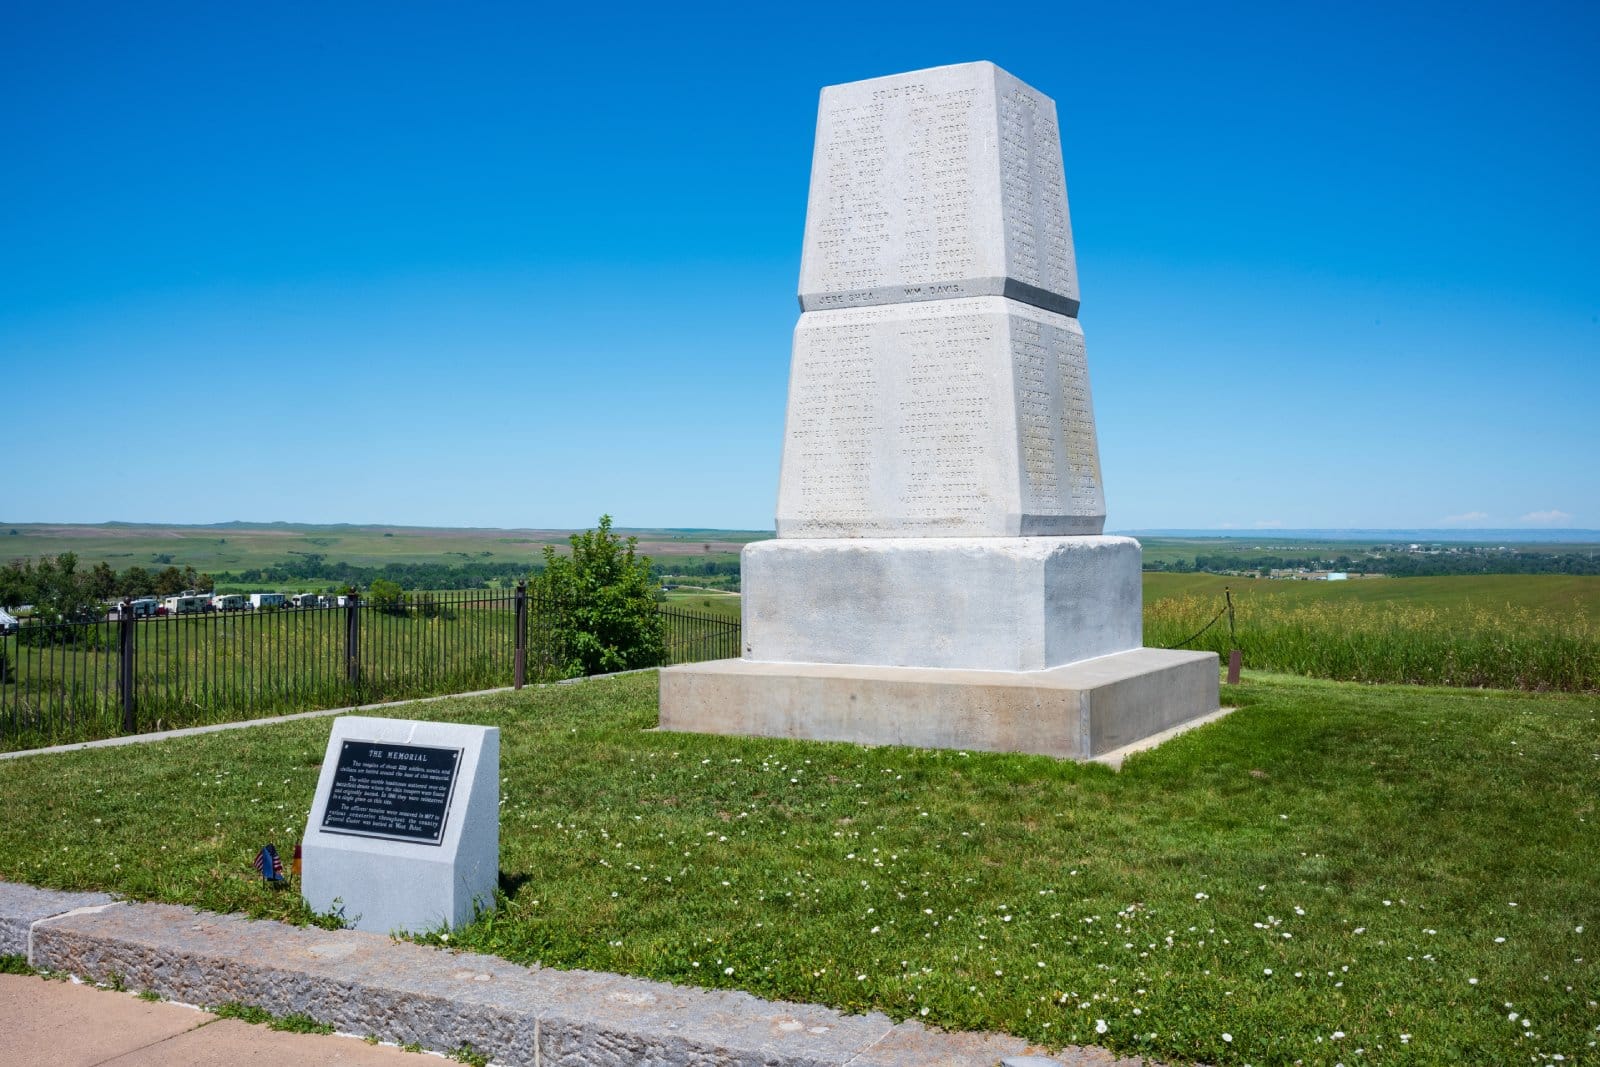 <p class="wp-caption-text">Image Credit: Shutterstock / JWCohen</p>  <p>This site memorializes the 1876 Battle of the Little Bighorn, where Lieutenant Colonel George Custer made his last stand.</p>